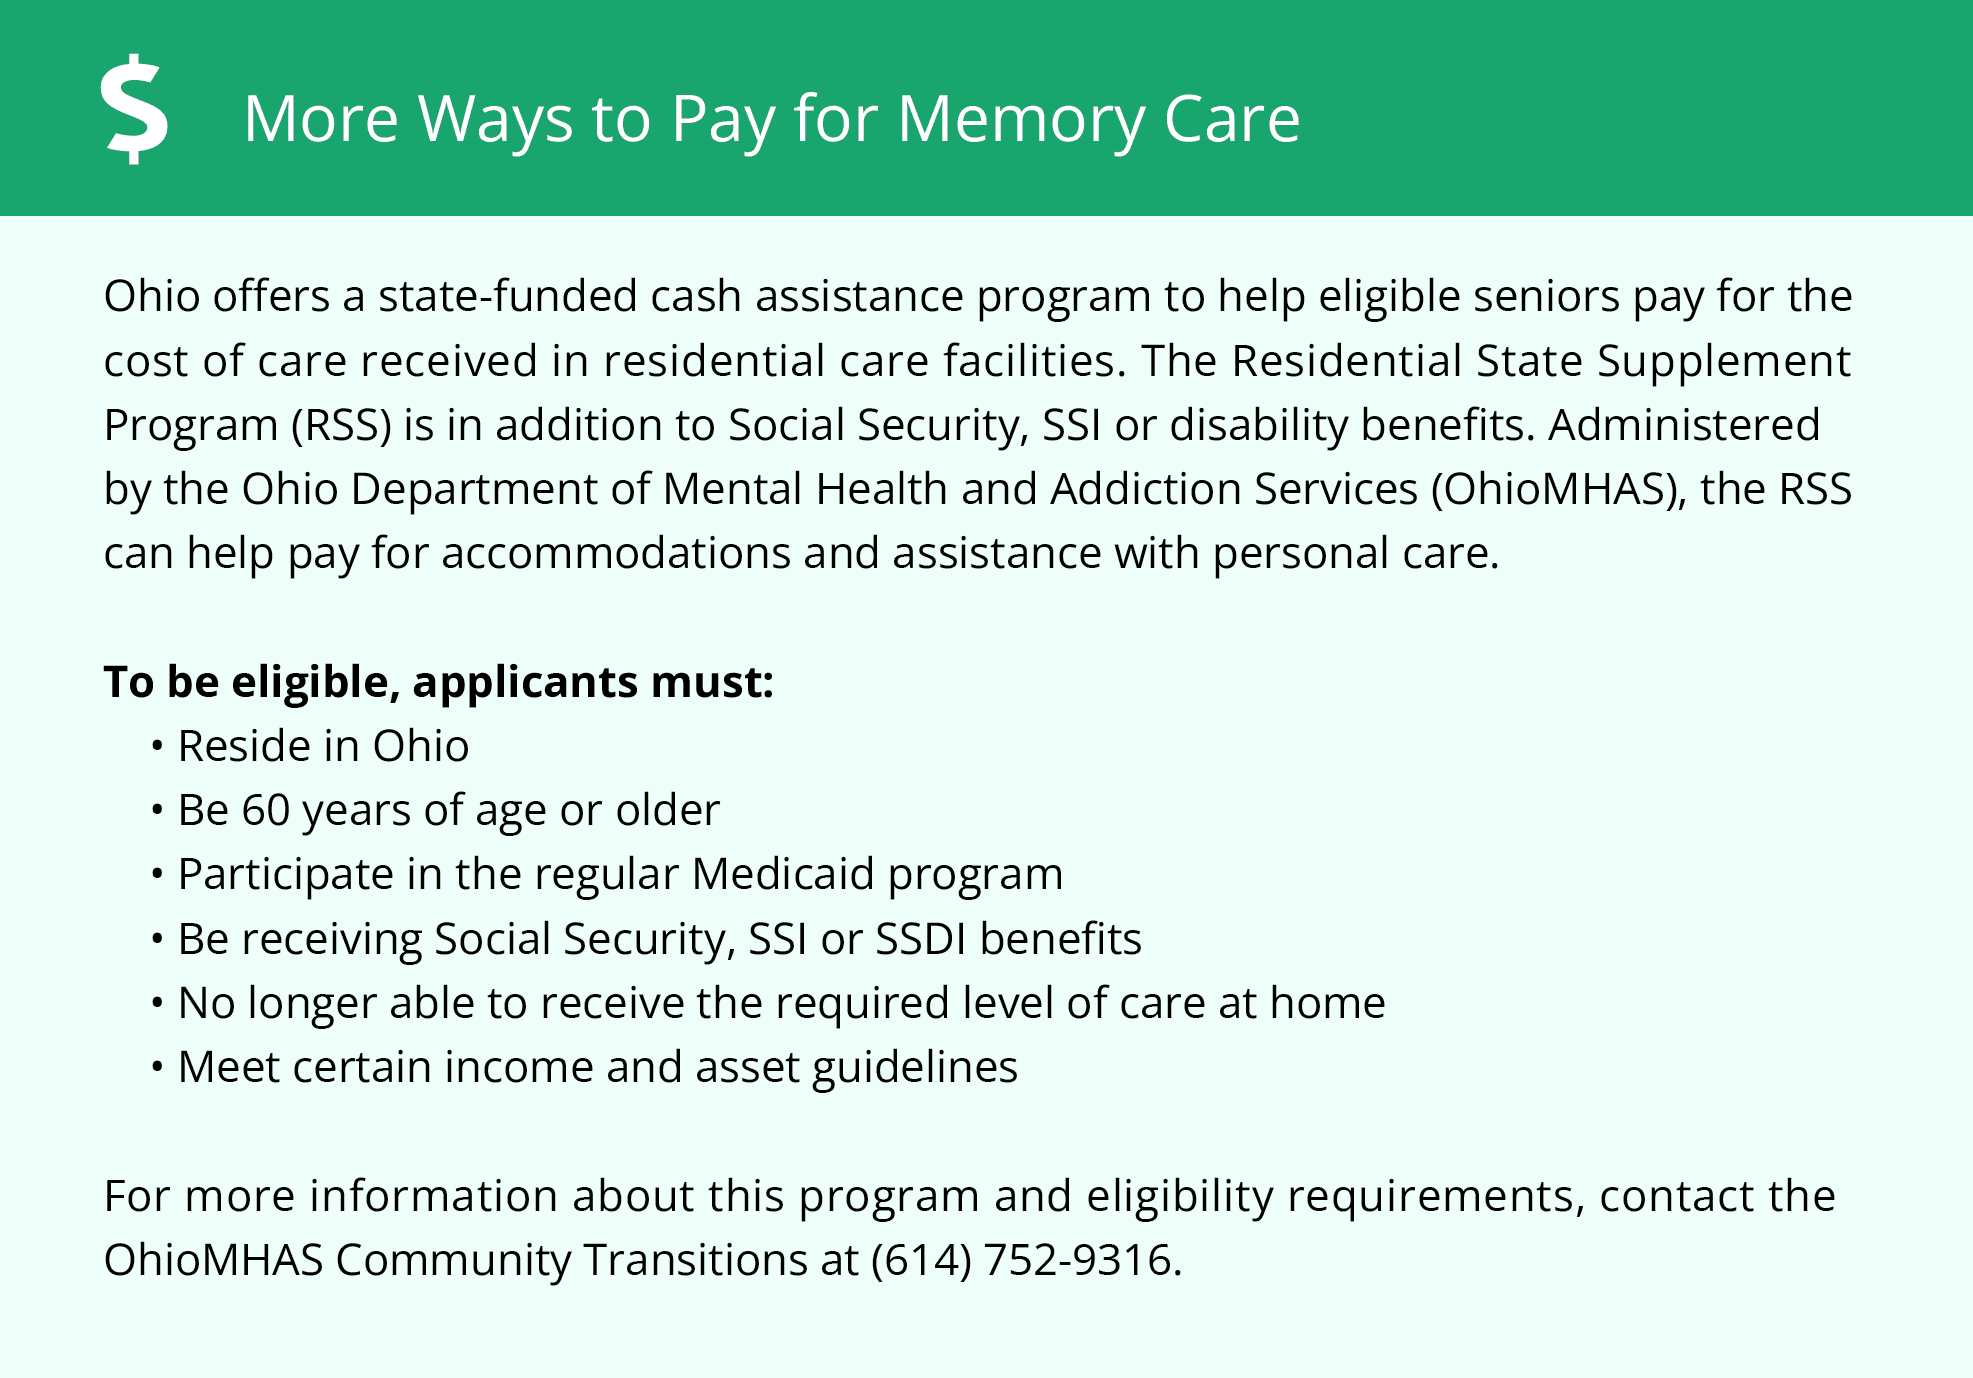 More ways to pay for memory care in OH